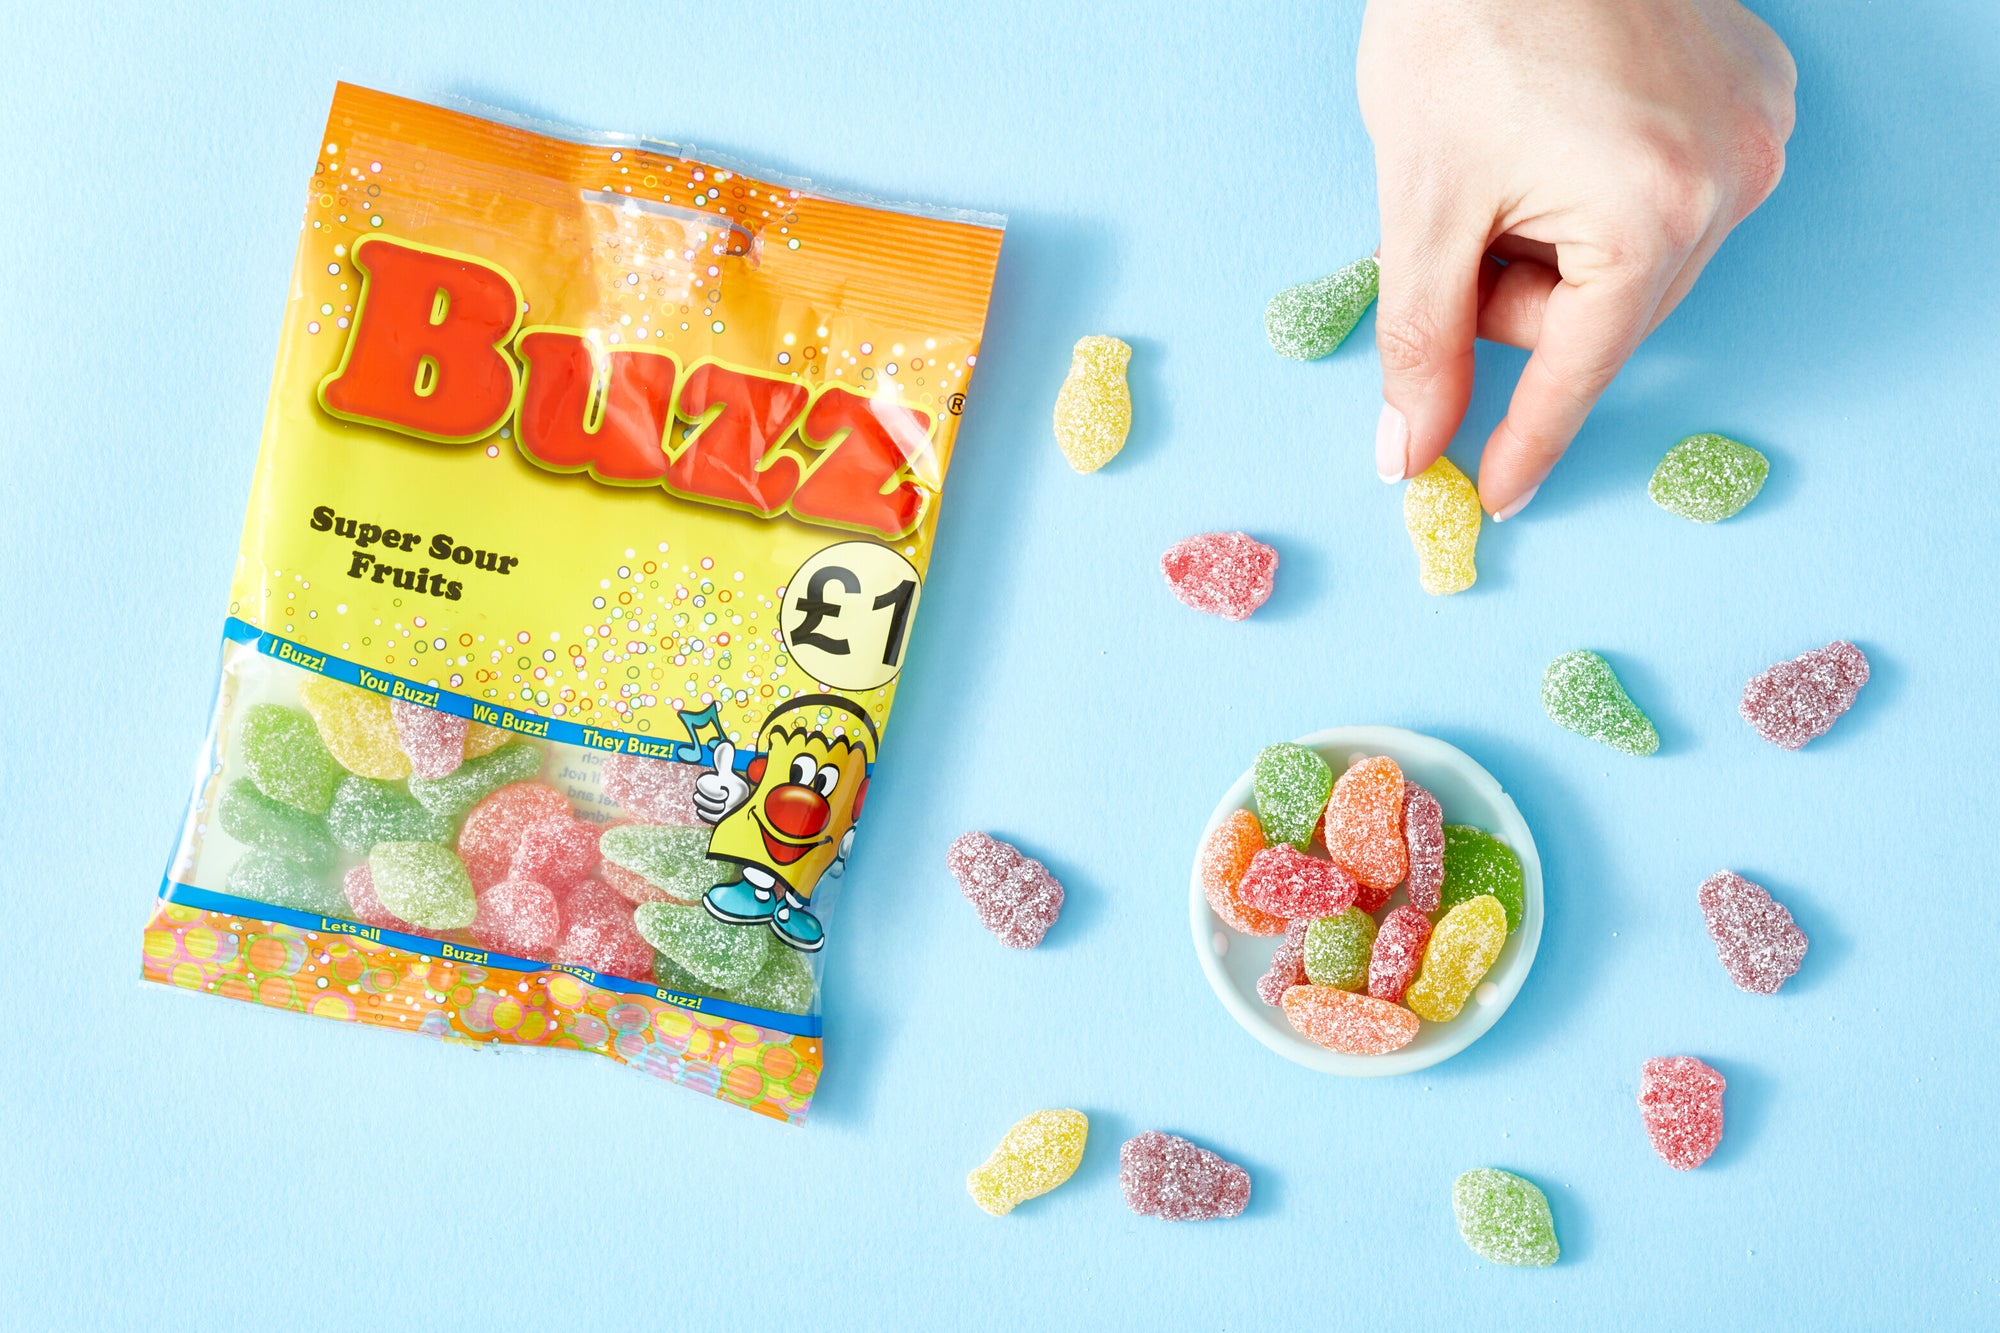 Buzz Sweets Super Sour Fruits | Share Pack